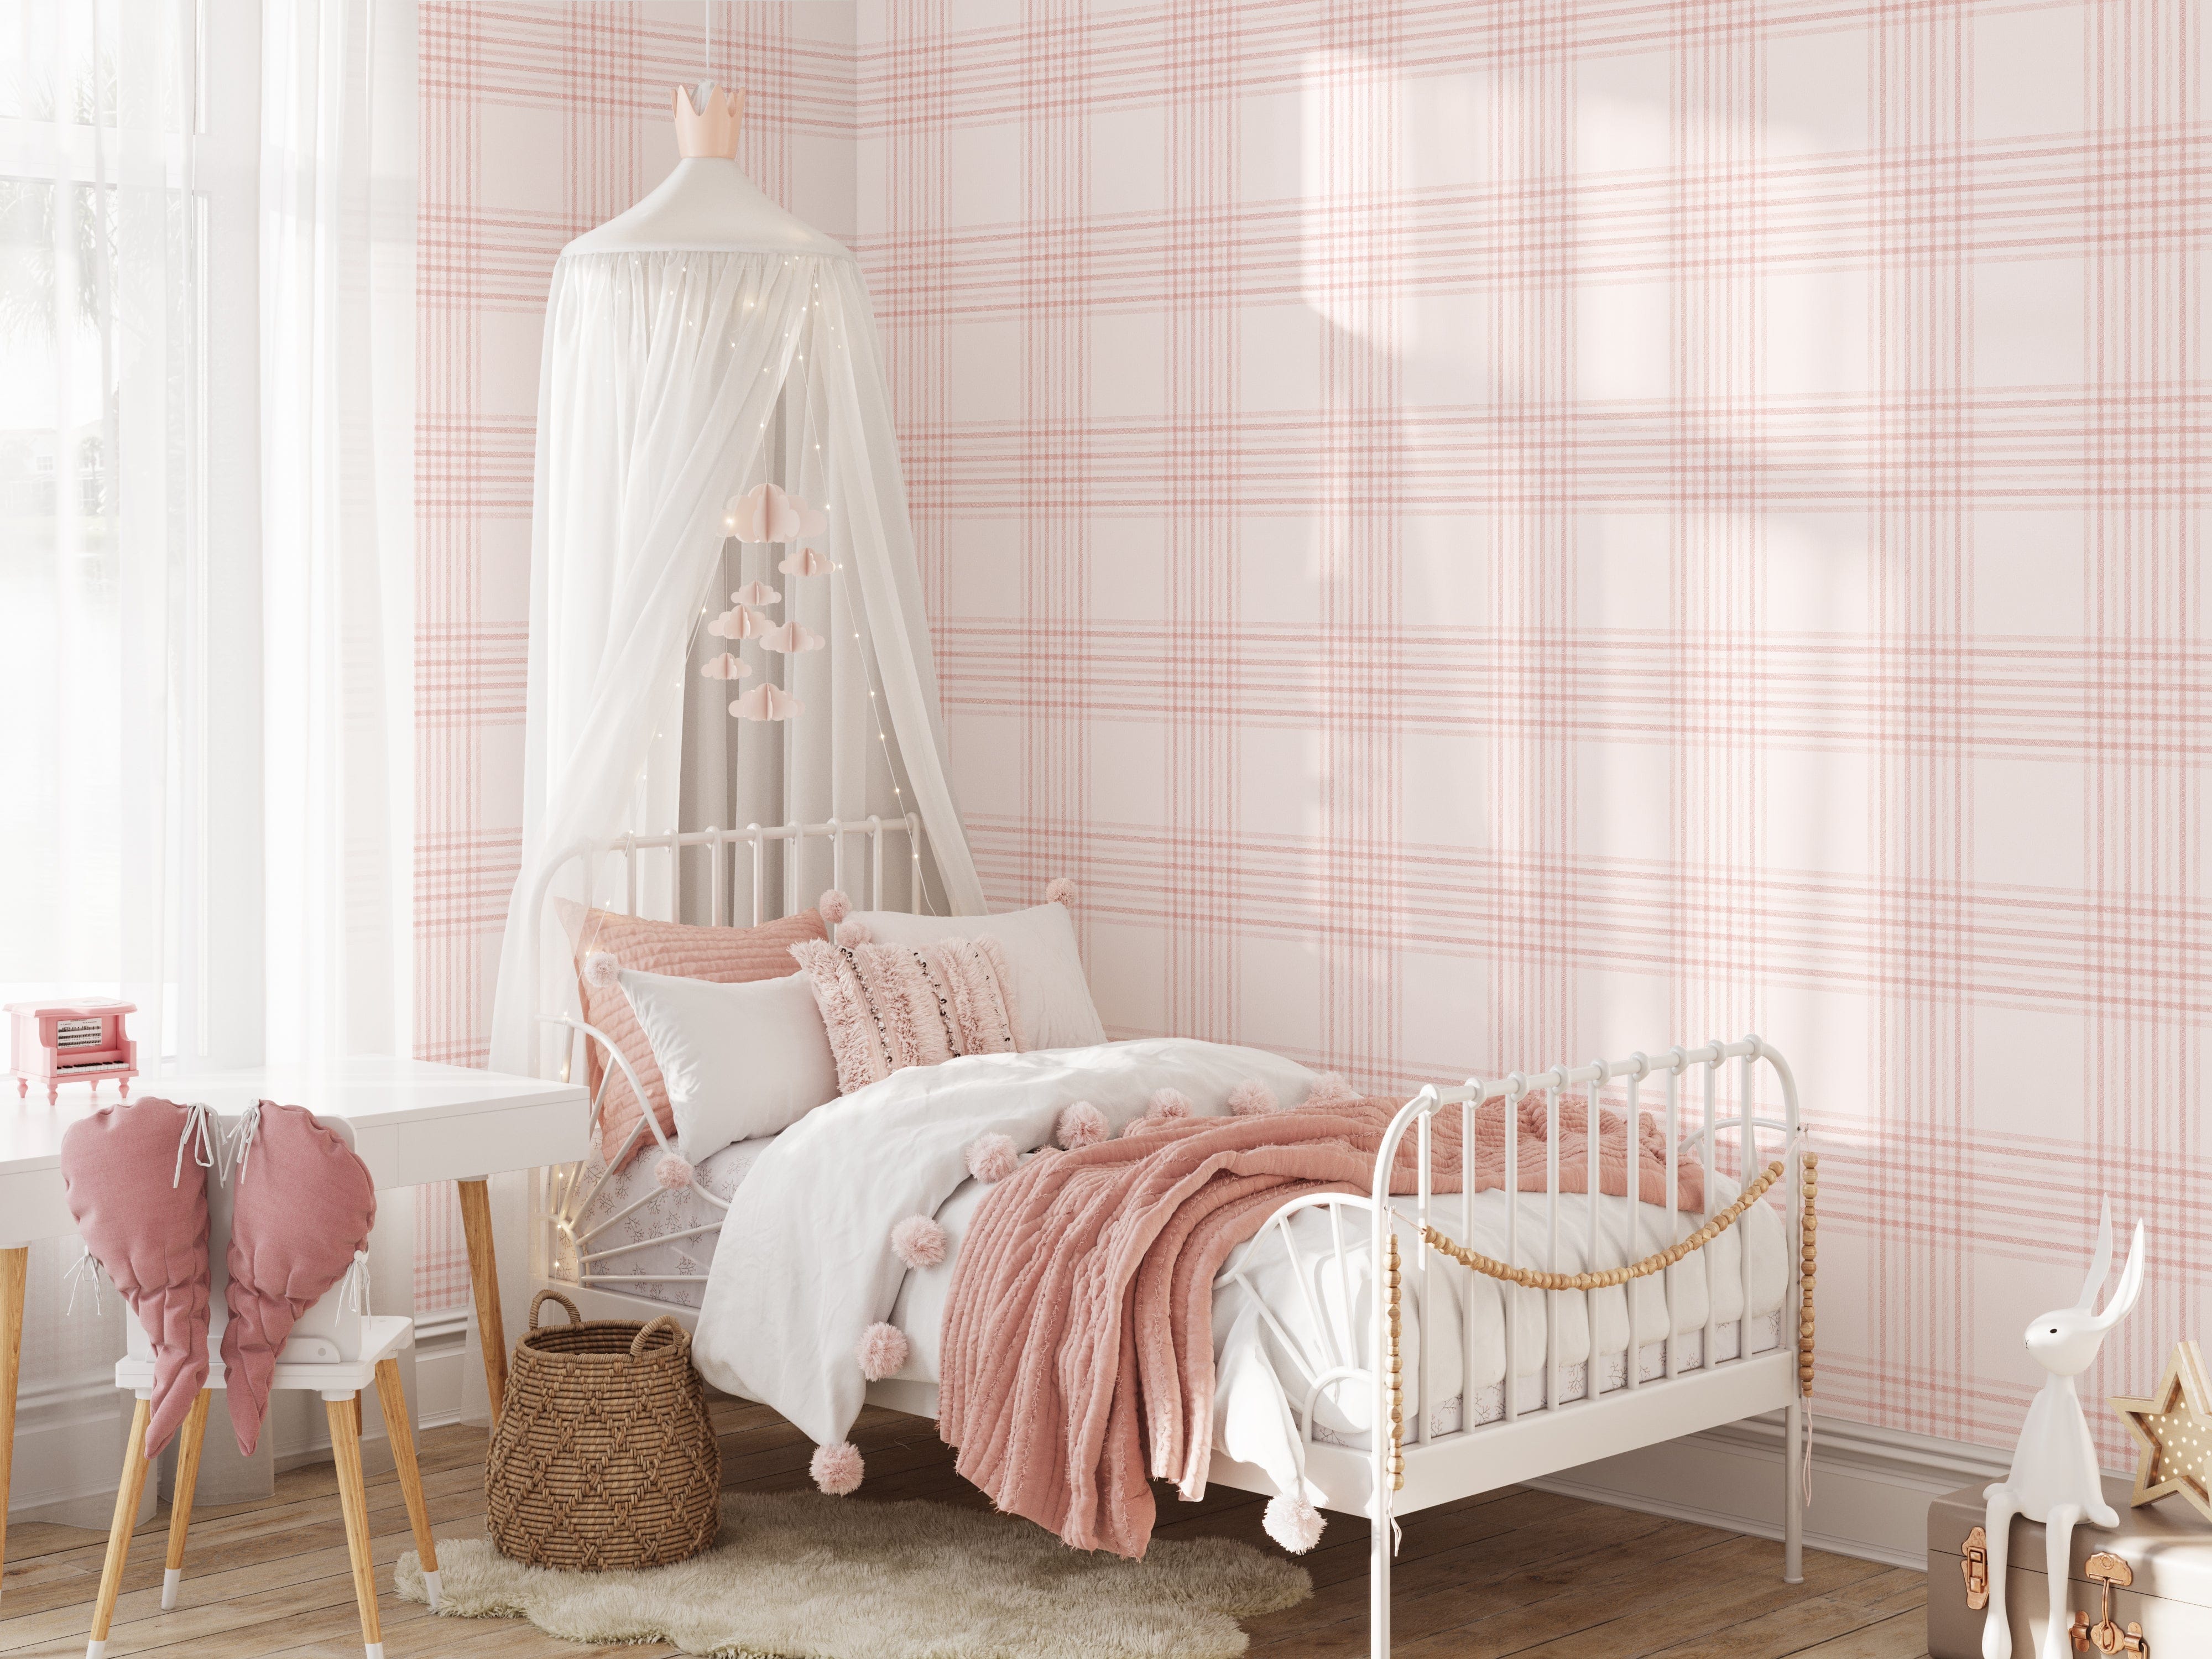 A bright and cozy children's bedroom with a white metal bed and pink bedding against a wall covered in pink plaid wallpaper. The wallpaper features a delicate checkered pattern in soft pink hues, adding a warm and inviting atmosphere to the room. The bed is adorned with pillows and a canopy, creating a dreamy and playful space.